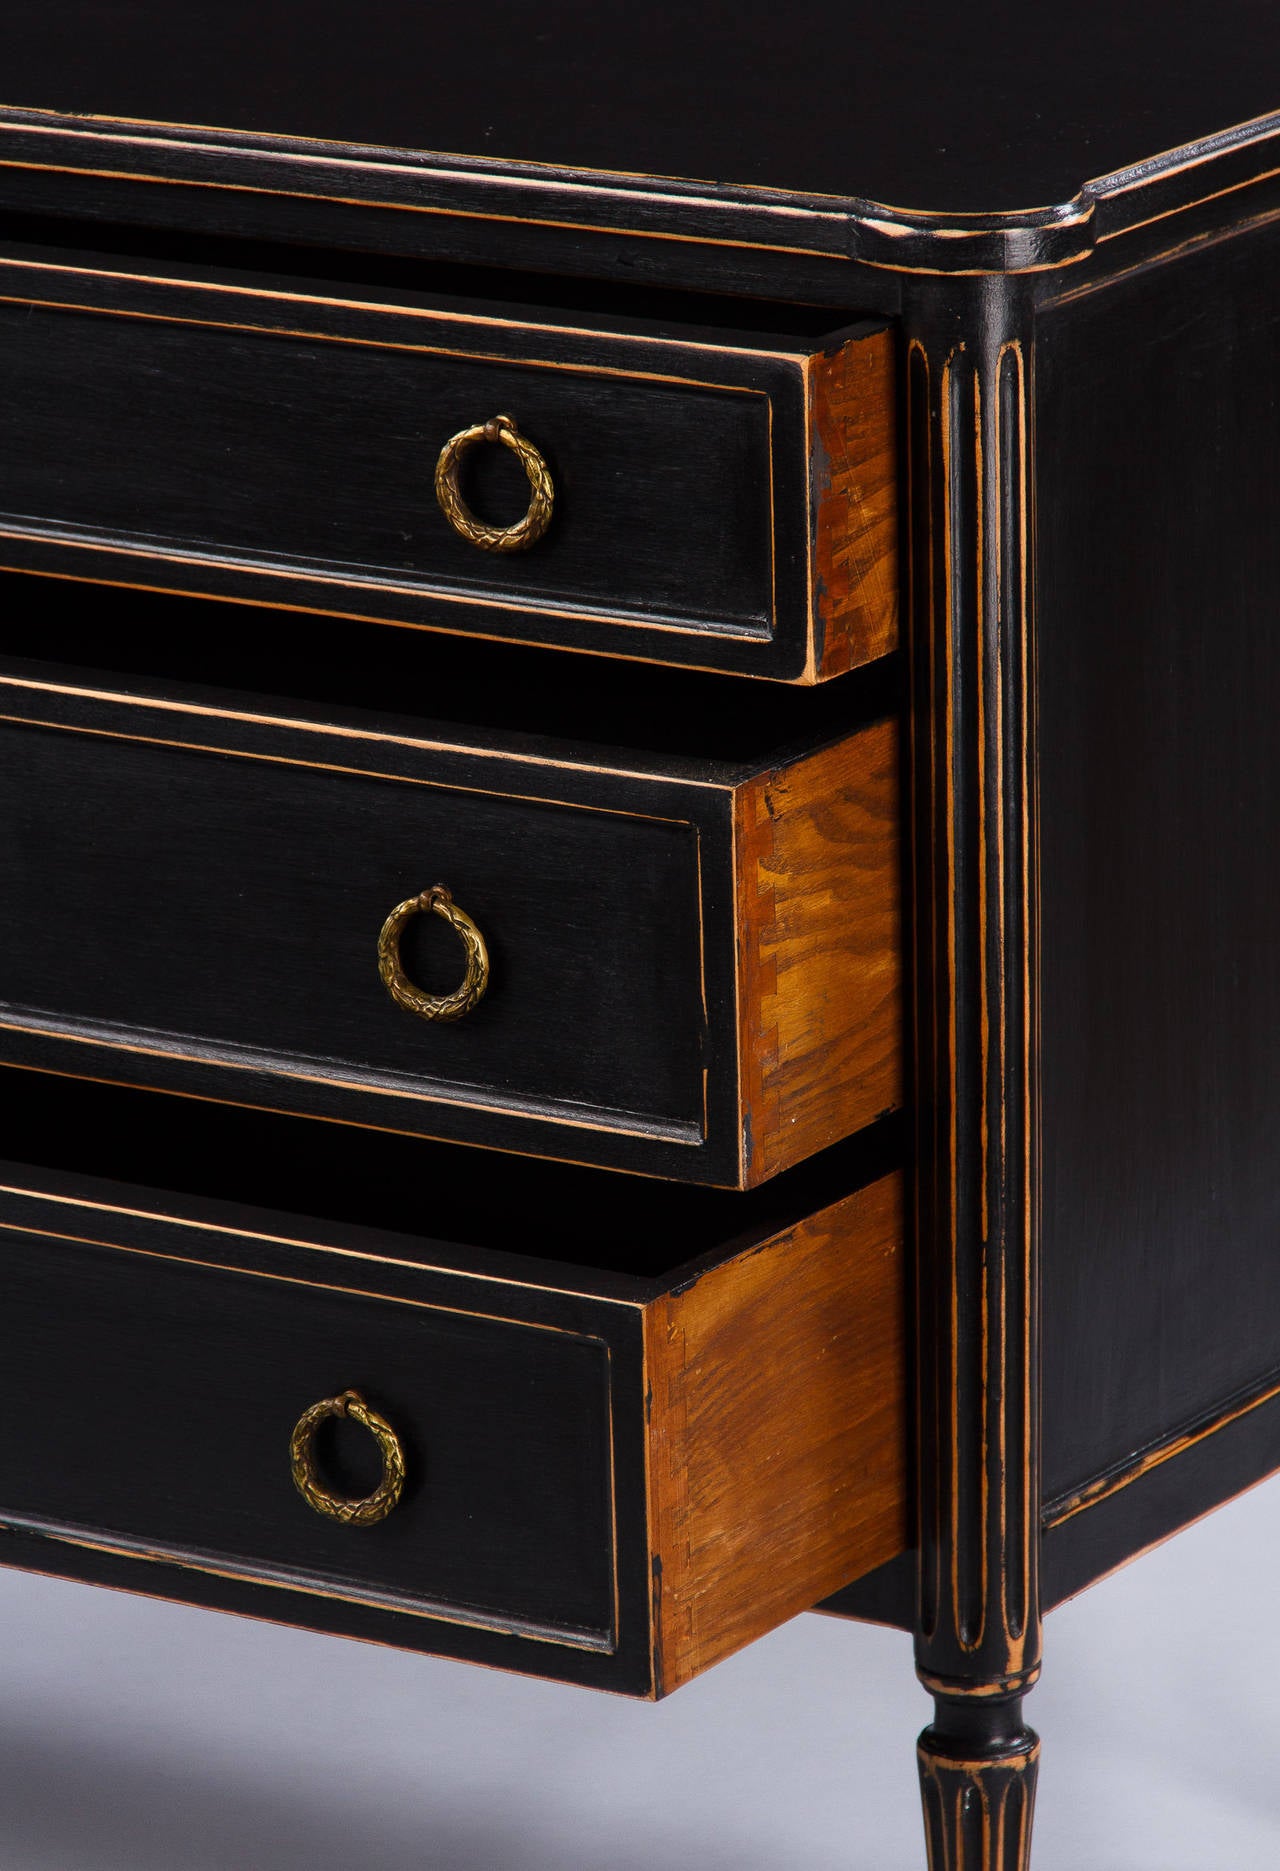 Early 20th Century French Louis XVI Style Ebonized Chest of Drawers circa 1920s